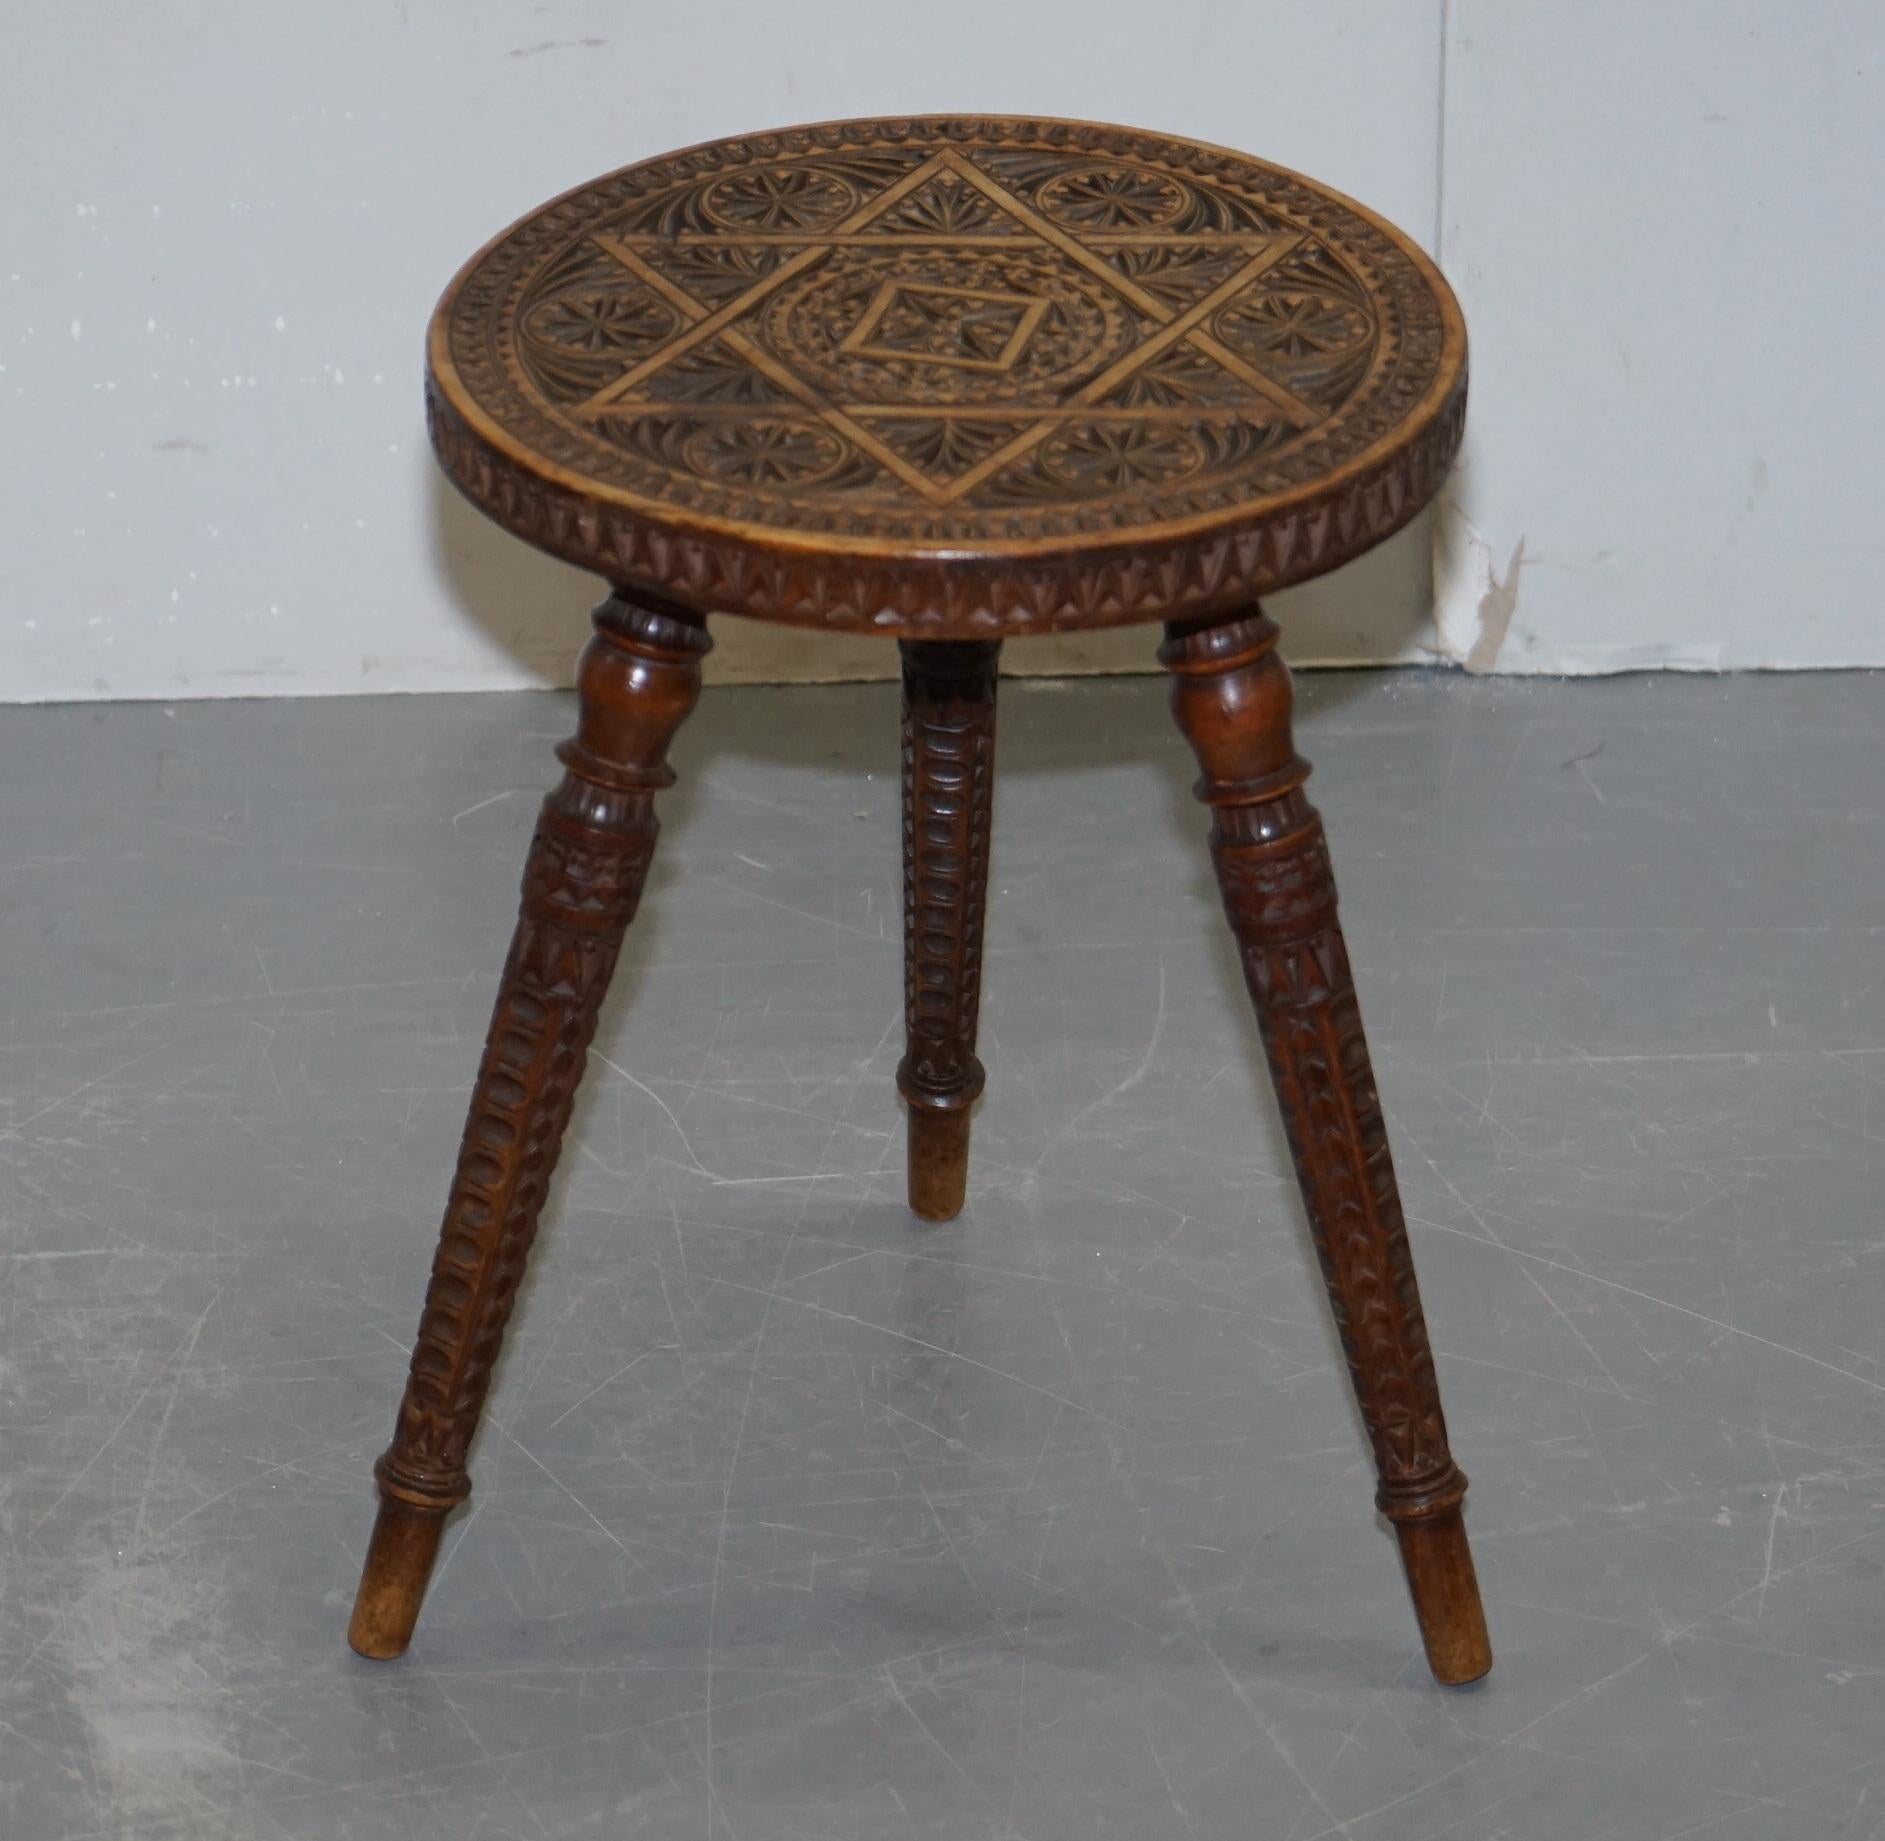 We are delighted to offer this stunning pair of hand carved Anglo Burmese 19th century hardwood export side table

A very good looking well made and decorative pair of tables, they are hand carved from head to toe and look like pure art furniture